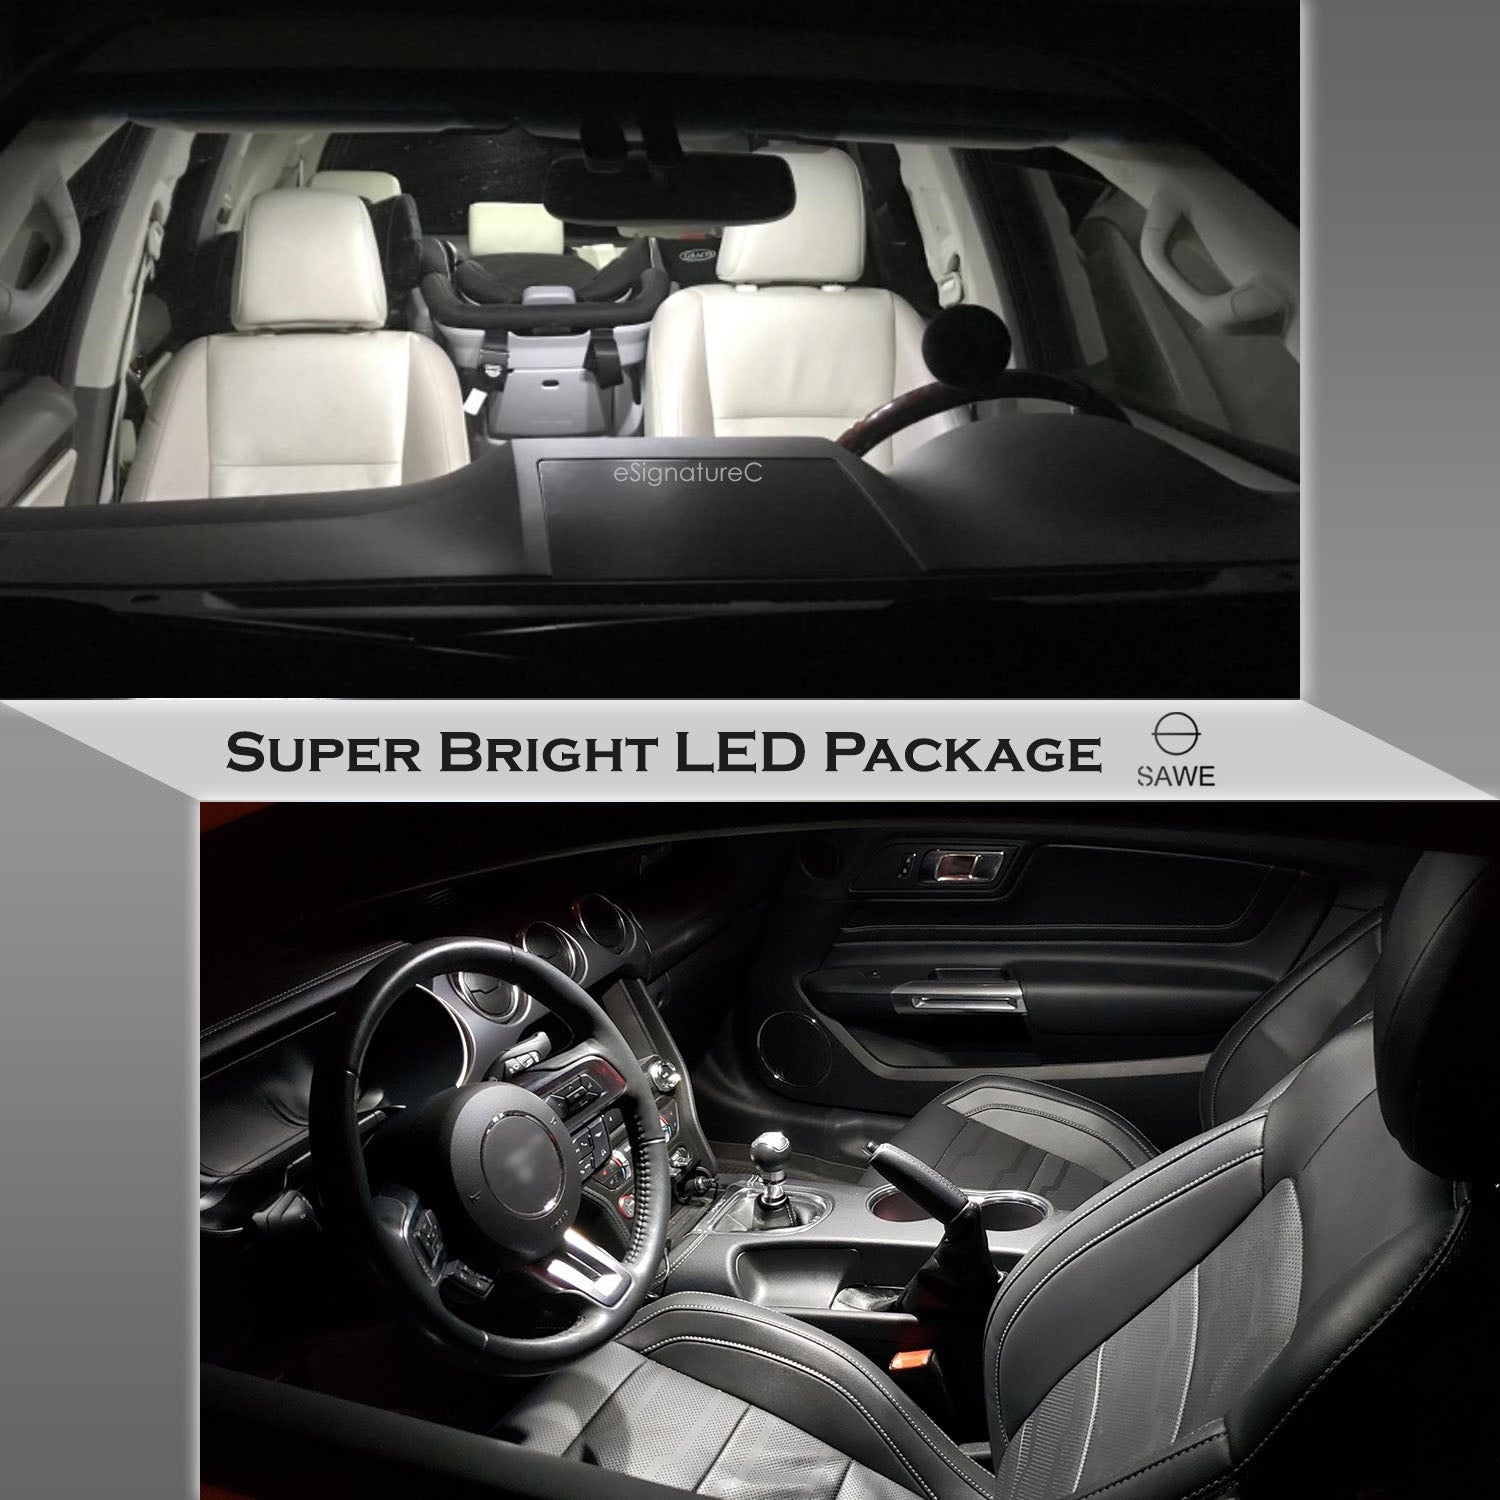 For Nissan Maxima Interior LED Lights - Dome & Map Light Bulbs Package Kit for 2009 - 2015 - White